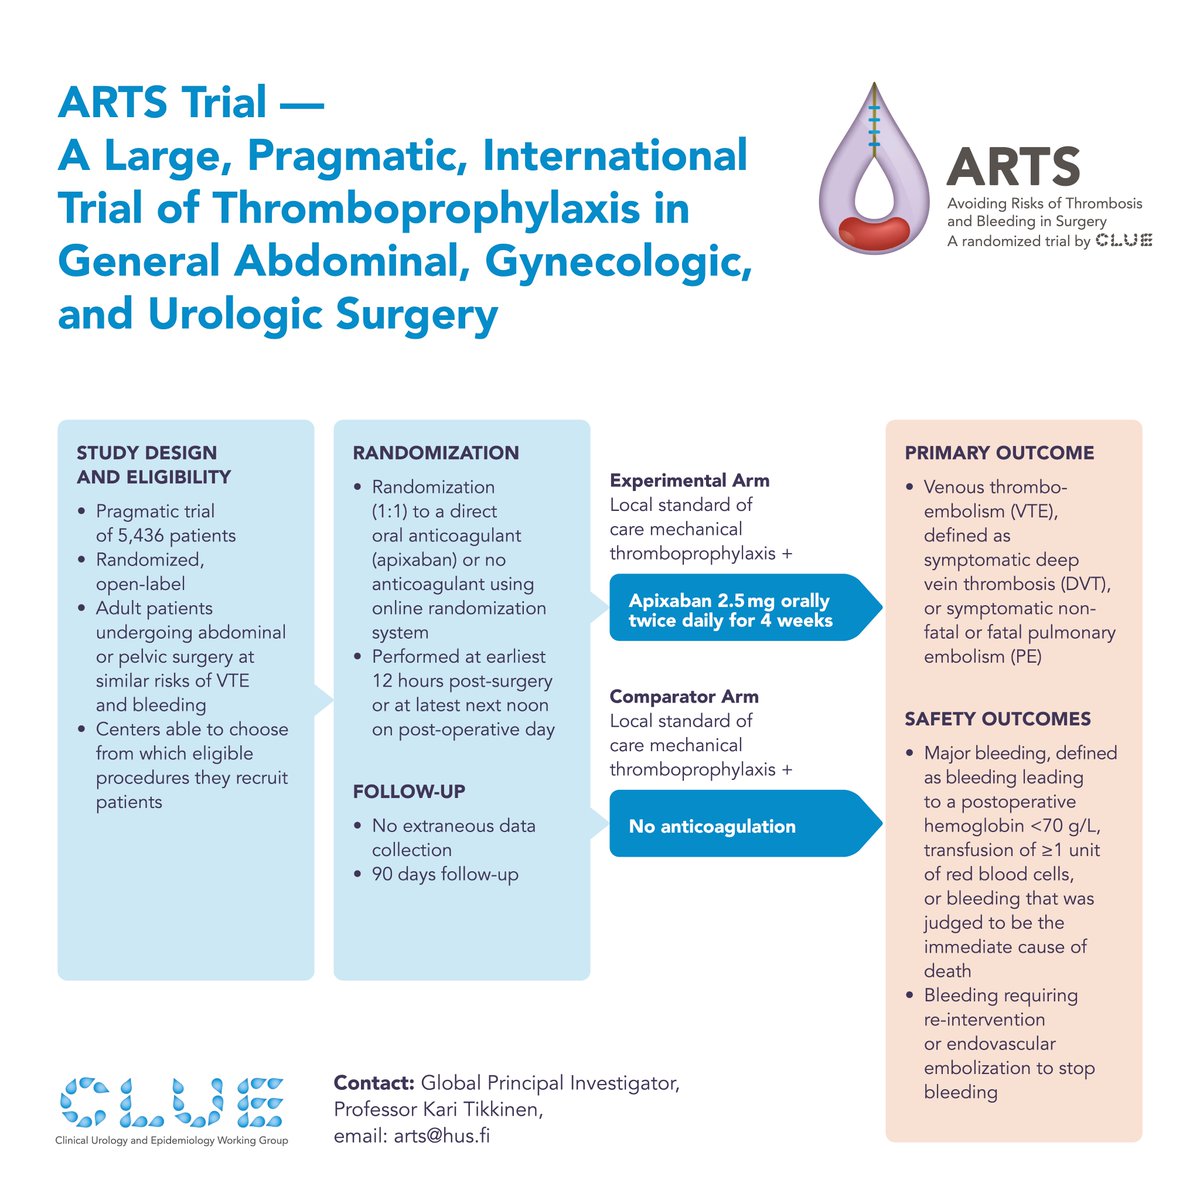 After revisions for regulators, we're just about to start recruitment for large, pragmatic #ARTStrial that recruits uro, gyne & abdominal surgery patients in which net benefit of pharmacologic prophylaxis uncertain. If interested, please comment or message #EBM #EAU24 @Uroweb